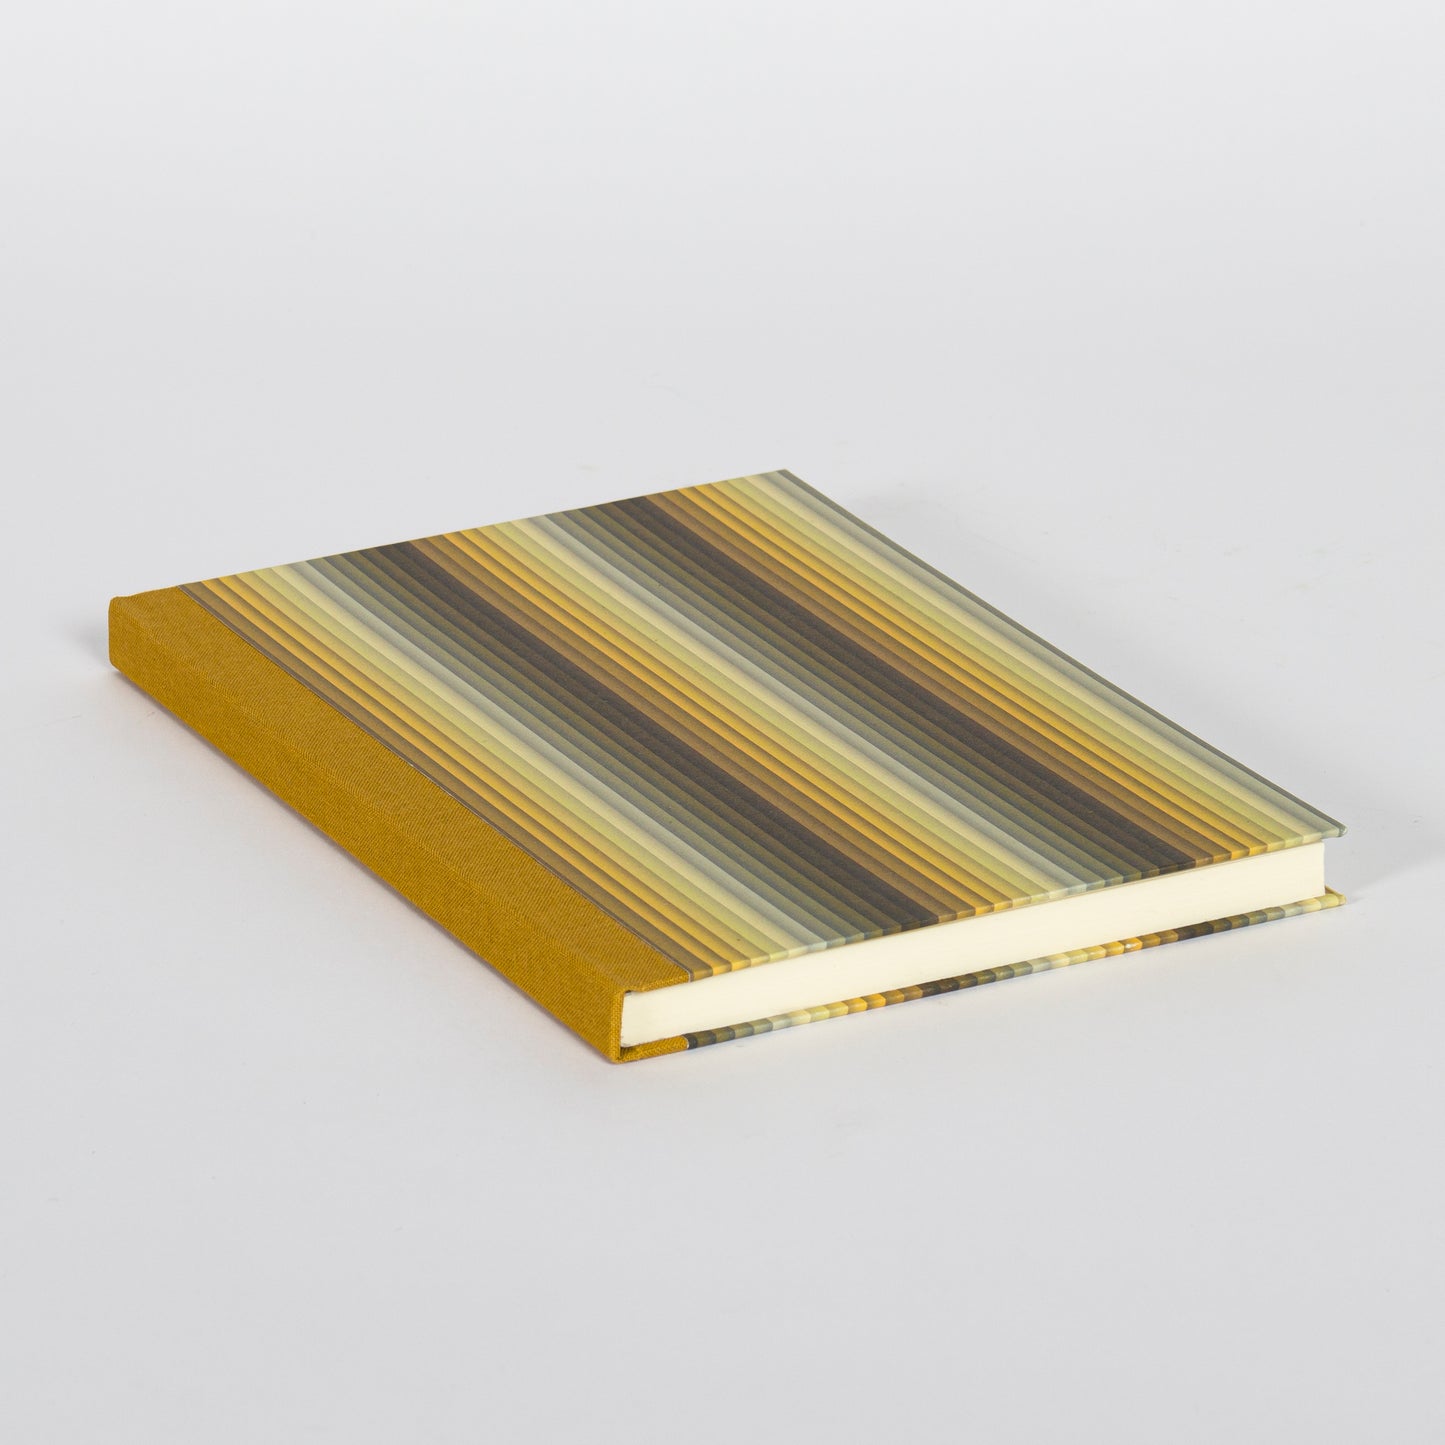 A5 Hardcover Notebook - Yellow Undulating Stripes